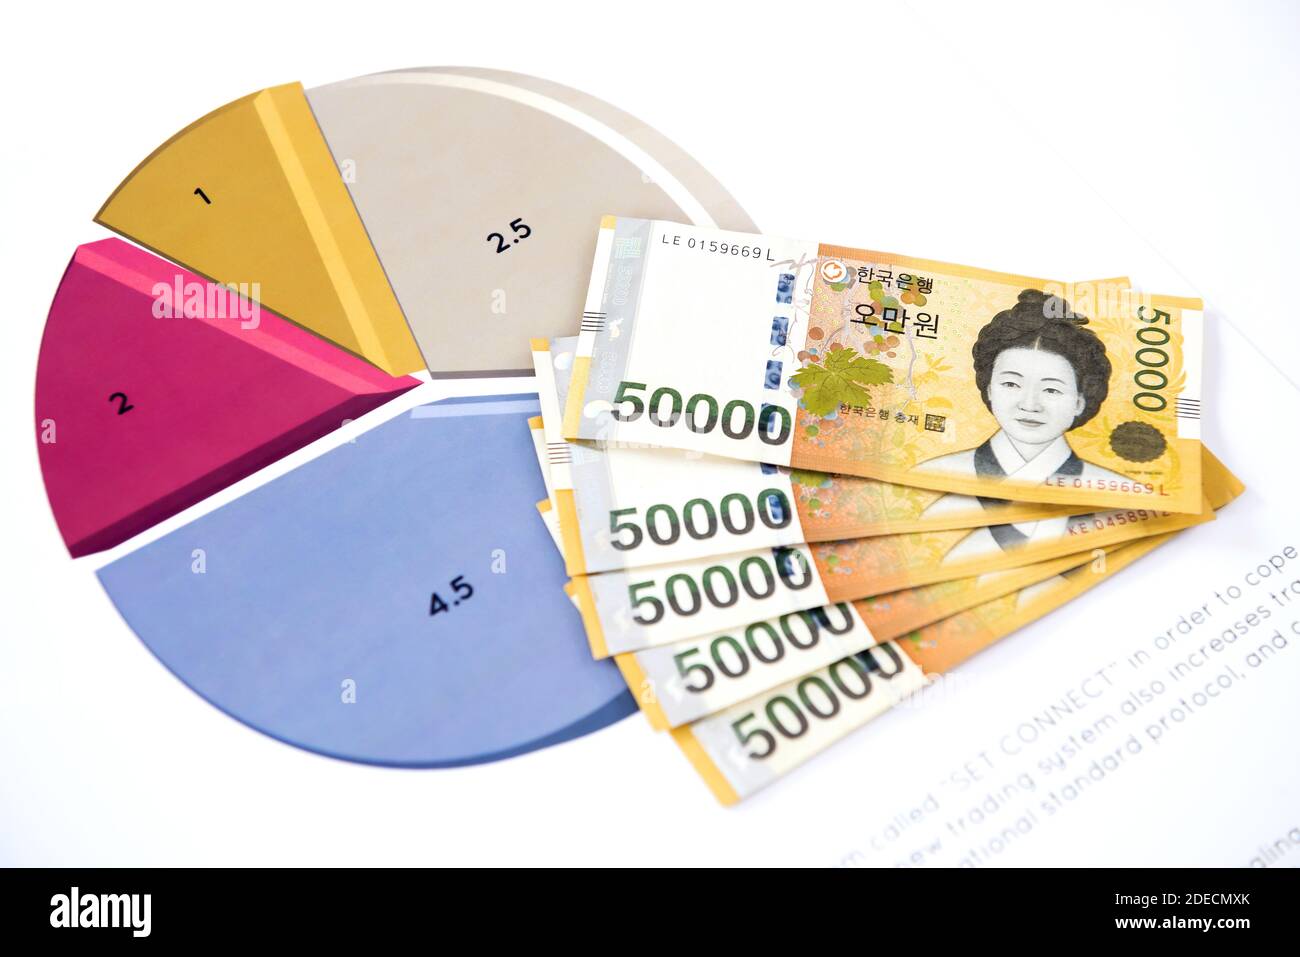 South Korean won money banknotes on  the paper with pie chart of business financial investment statistic Stock Photo